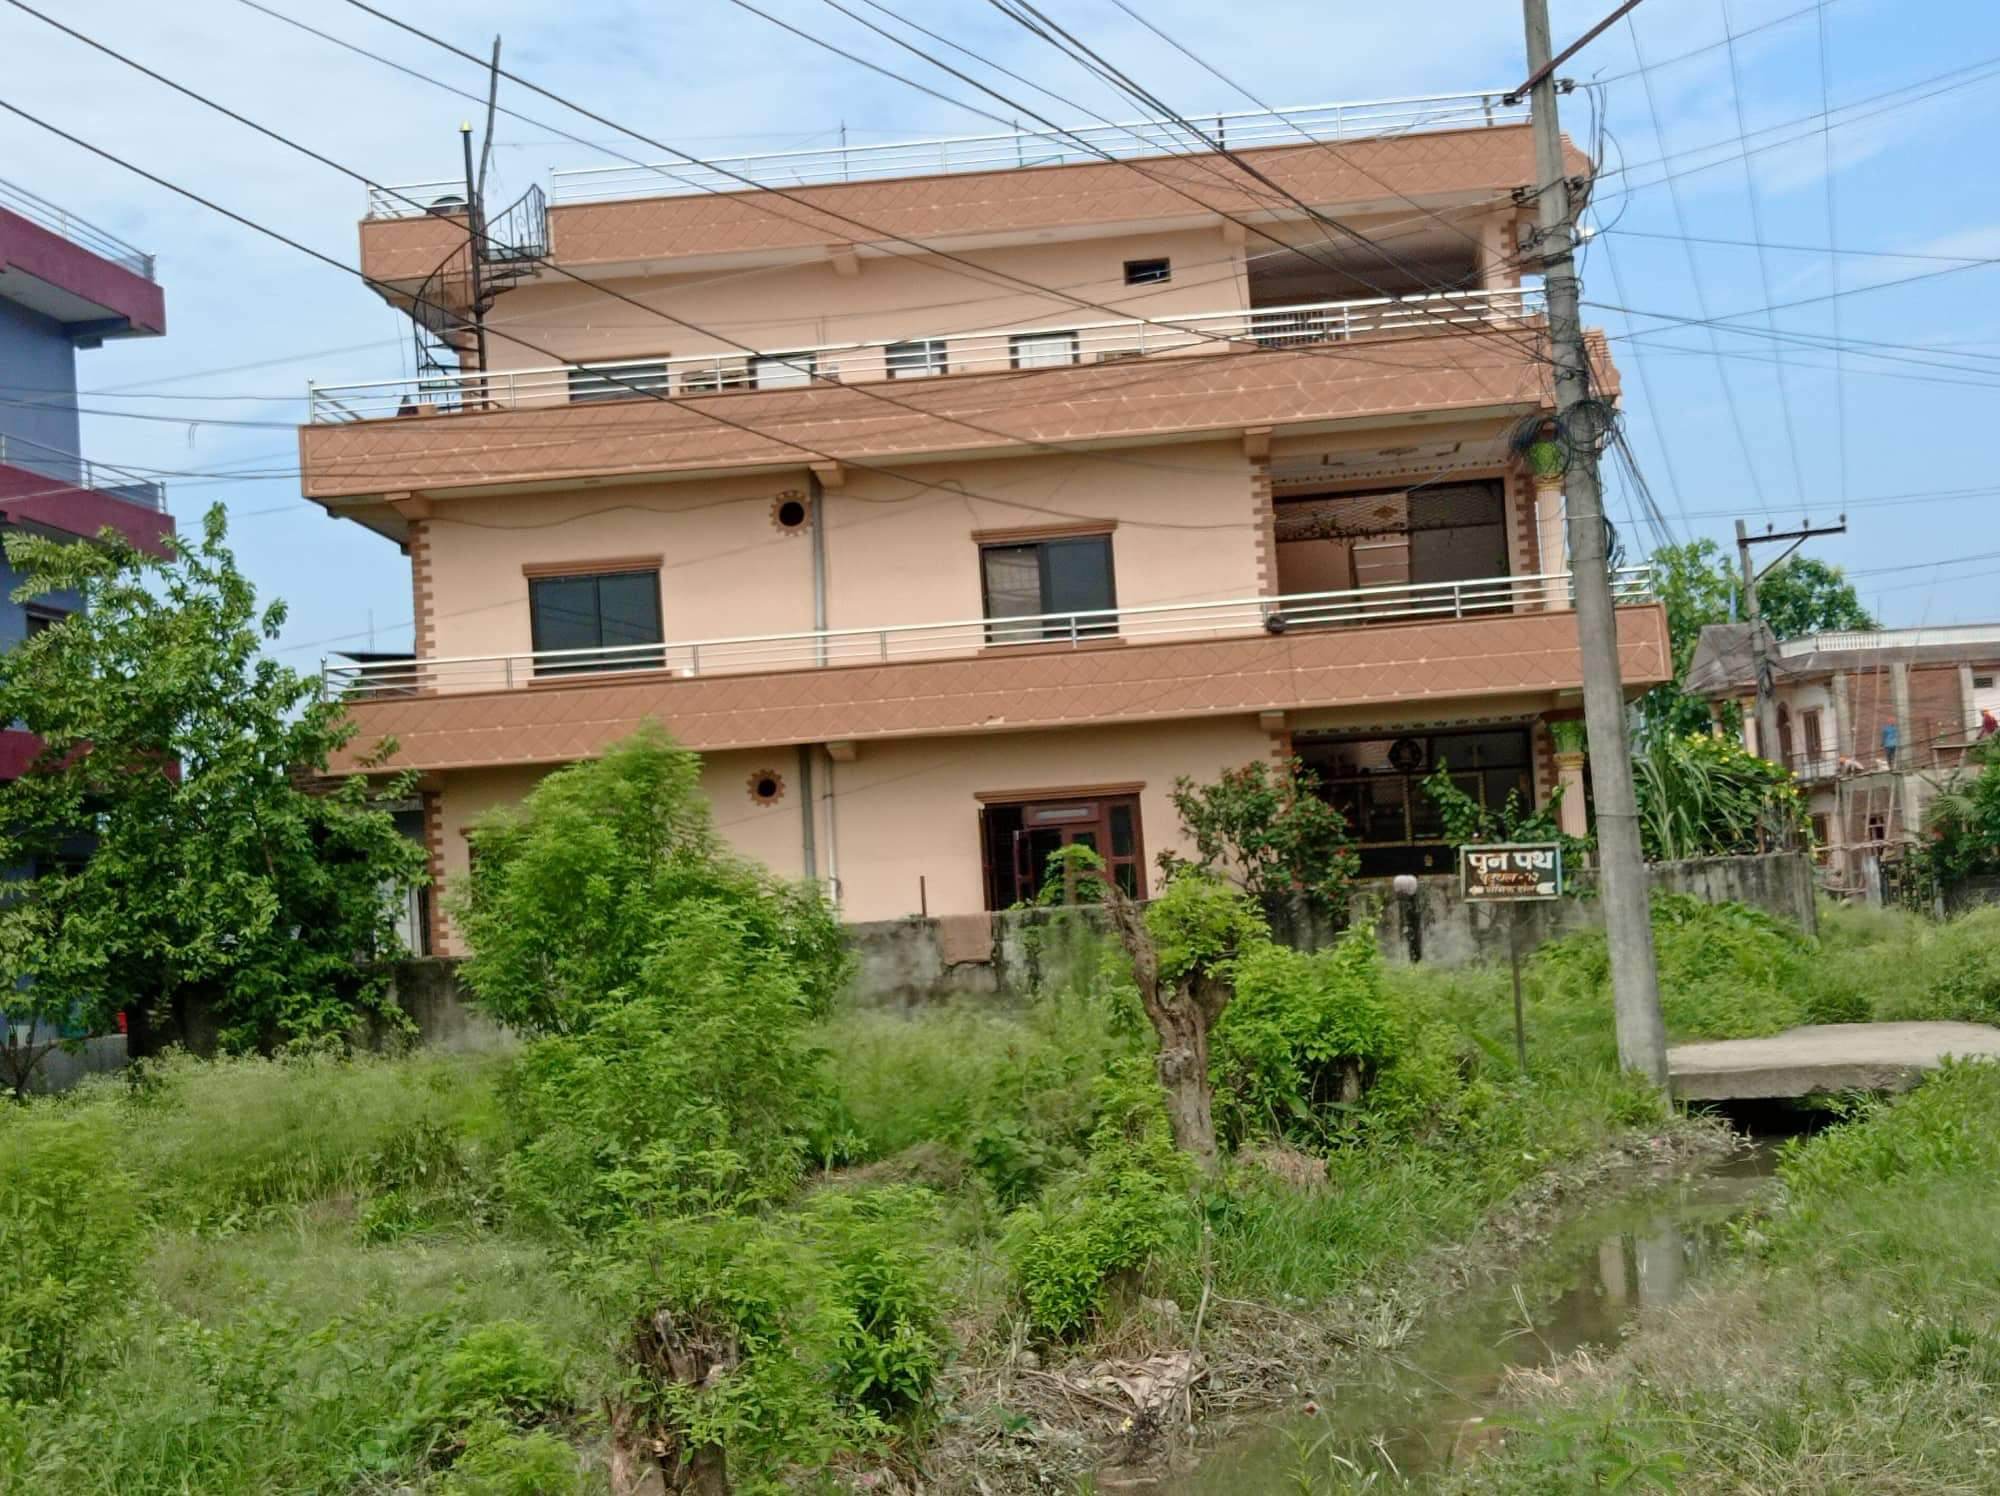 Attractive house sale at belbas butwal